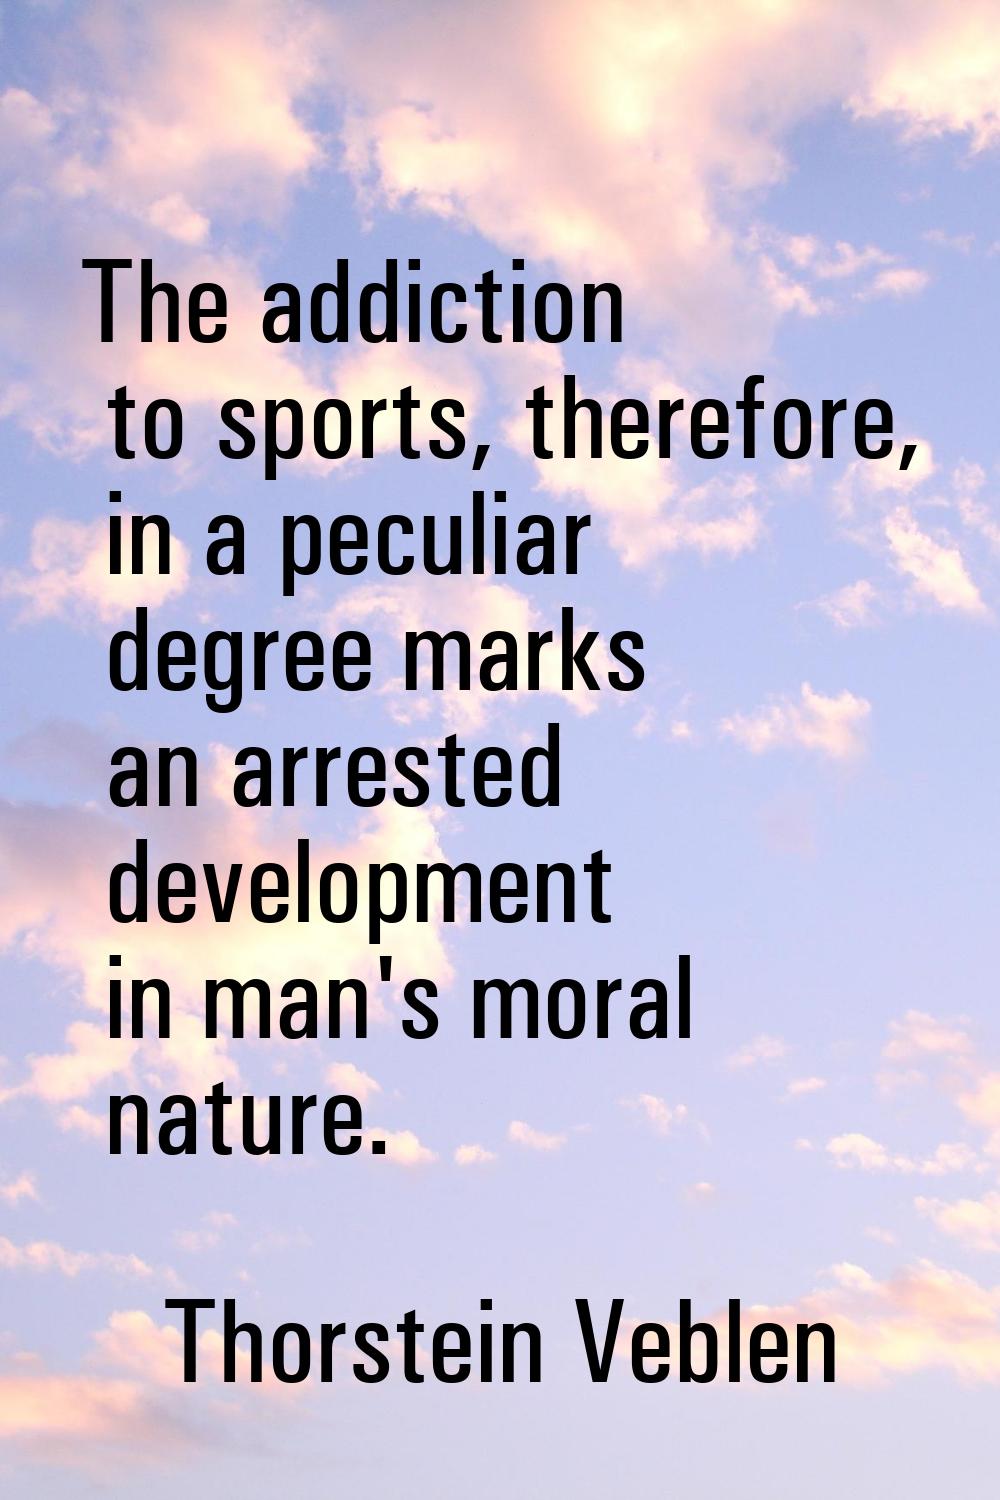 The addiction to sports, therefore, in a peculiar degree marks an arrested development in man's mor